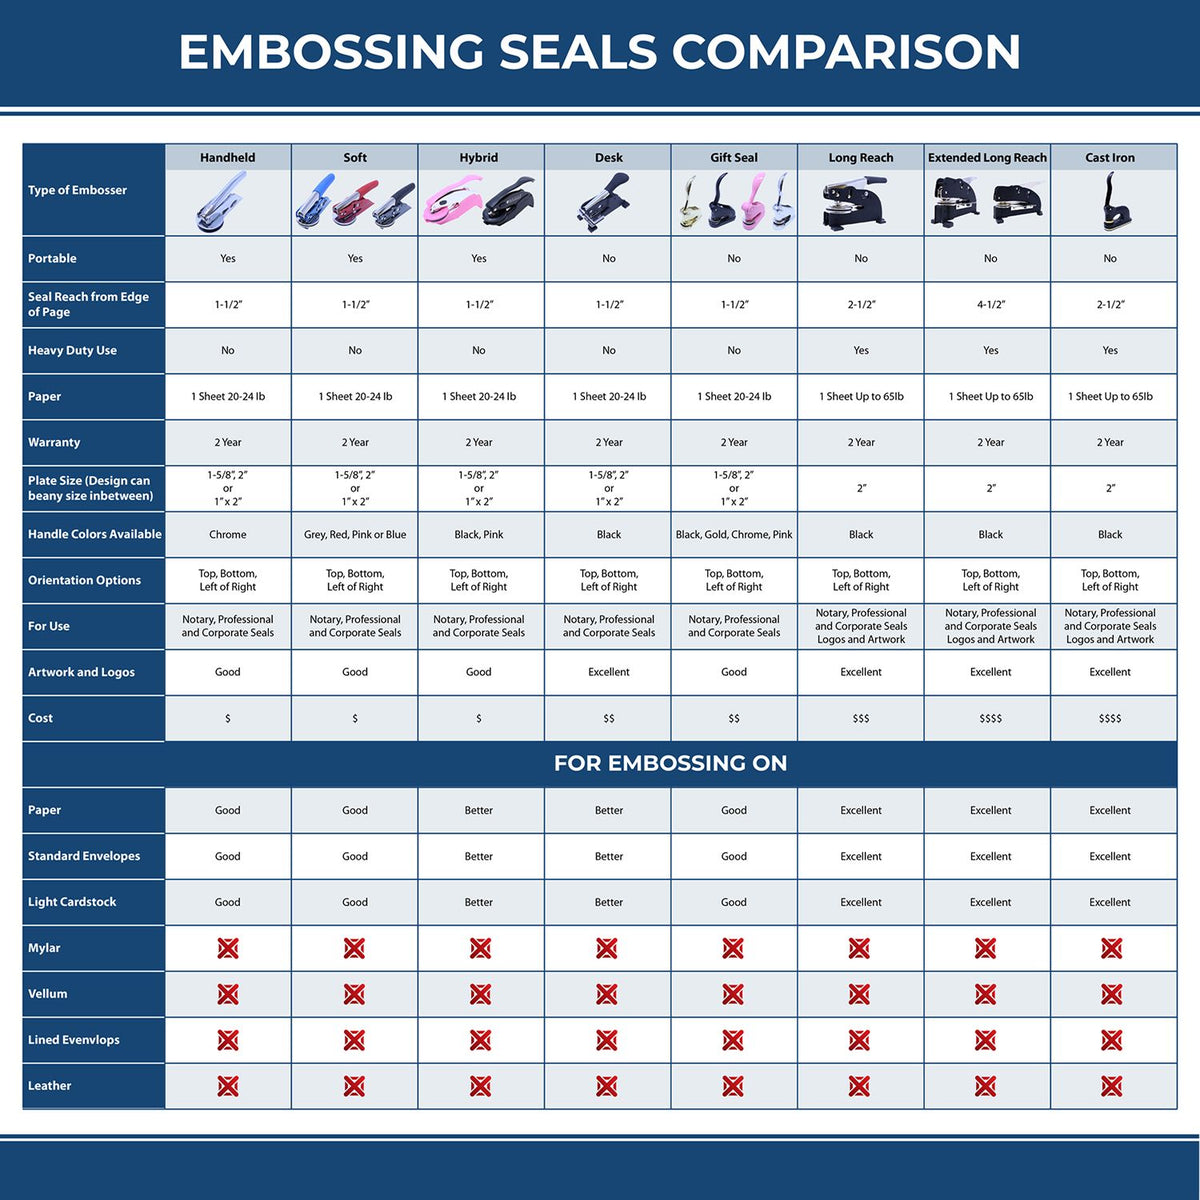 A comparison chart for the different types of mount models available for the State of Hawaii Extended Long Reach Geologist Seal